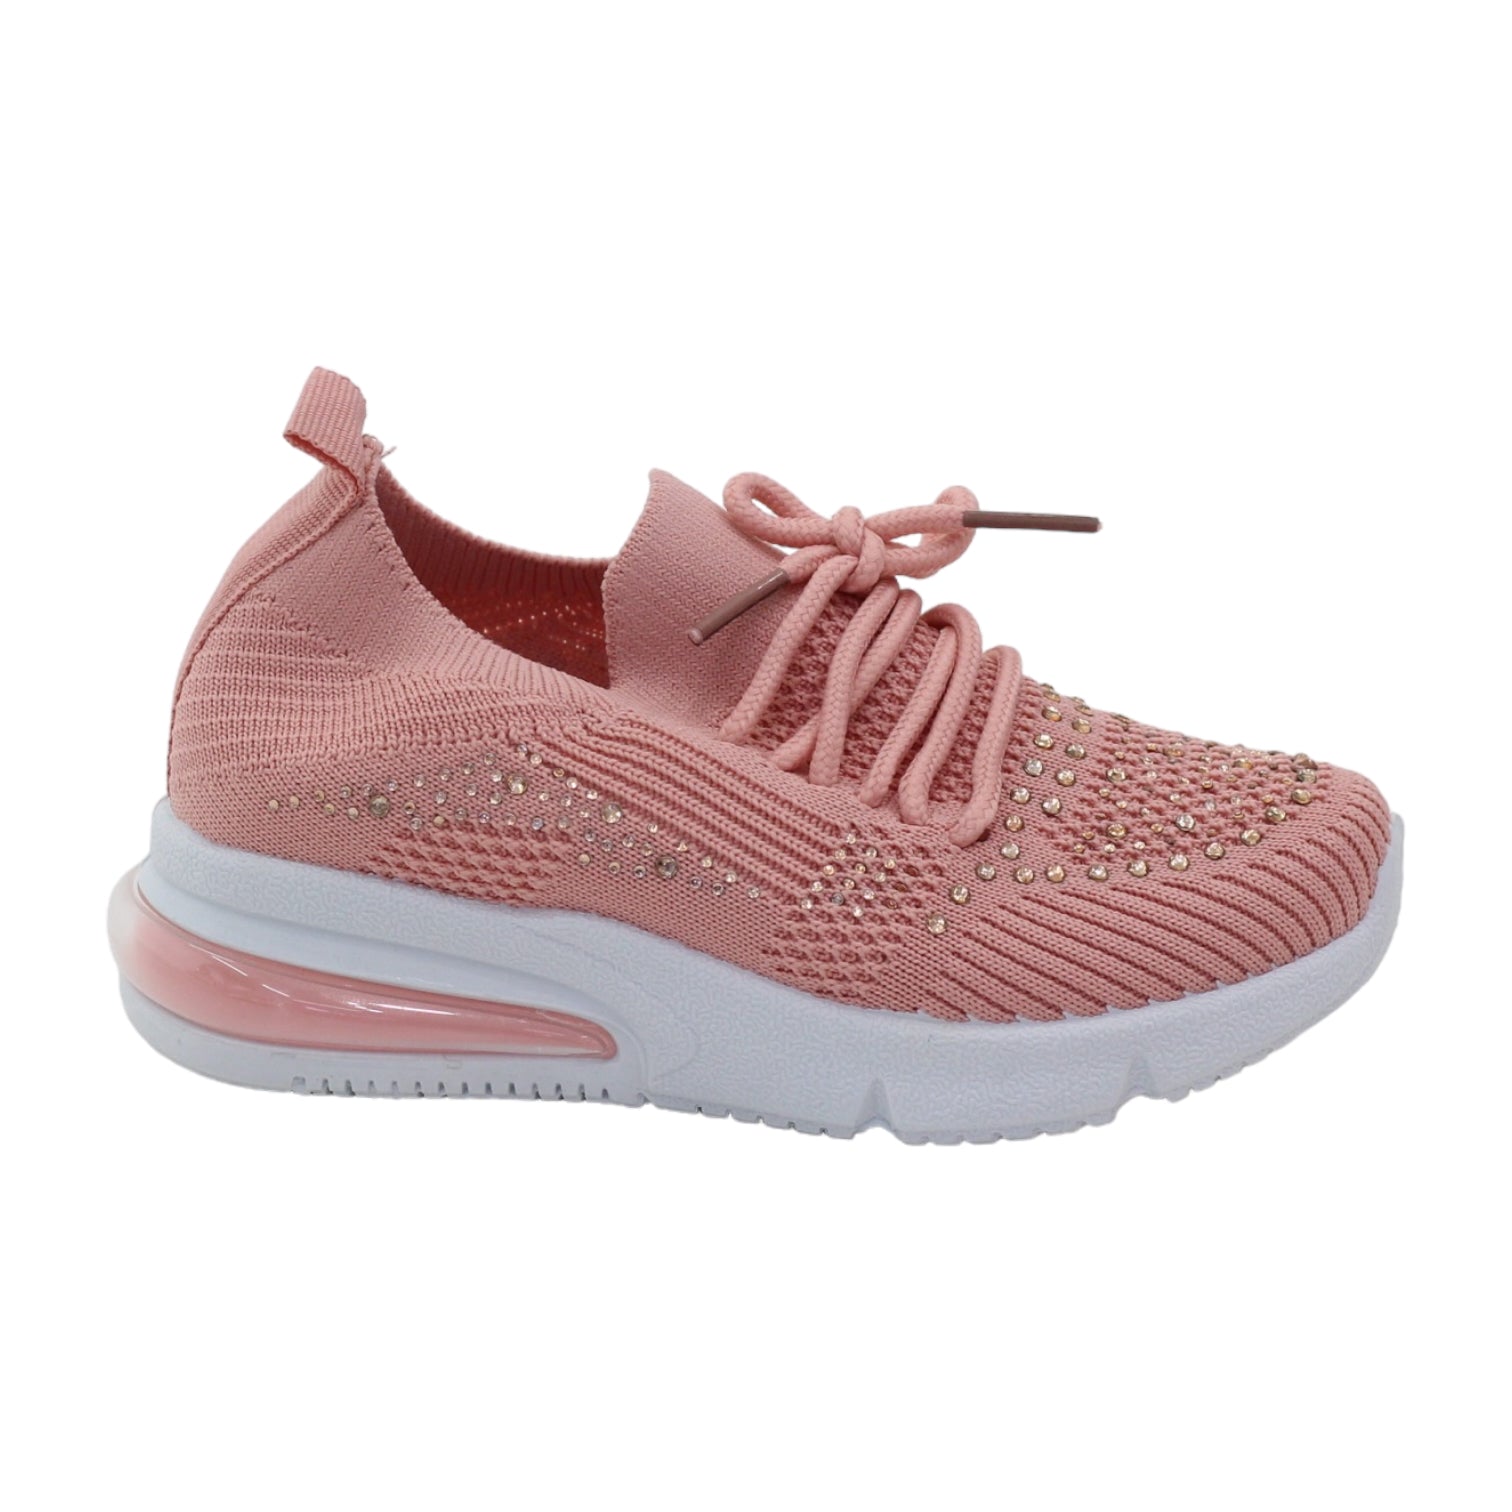 Obioma girls fly knit lace up sneaker with diamonds pink